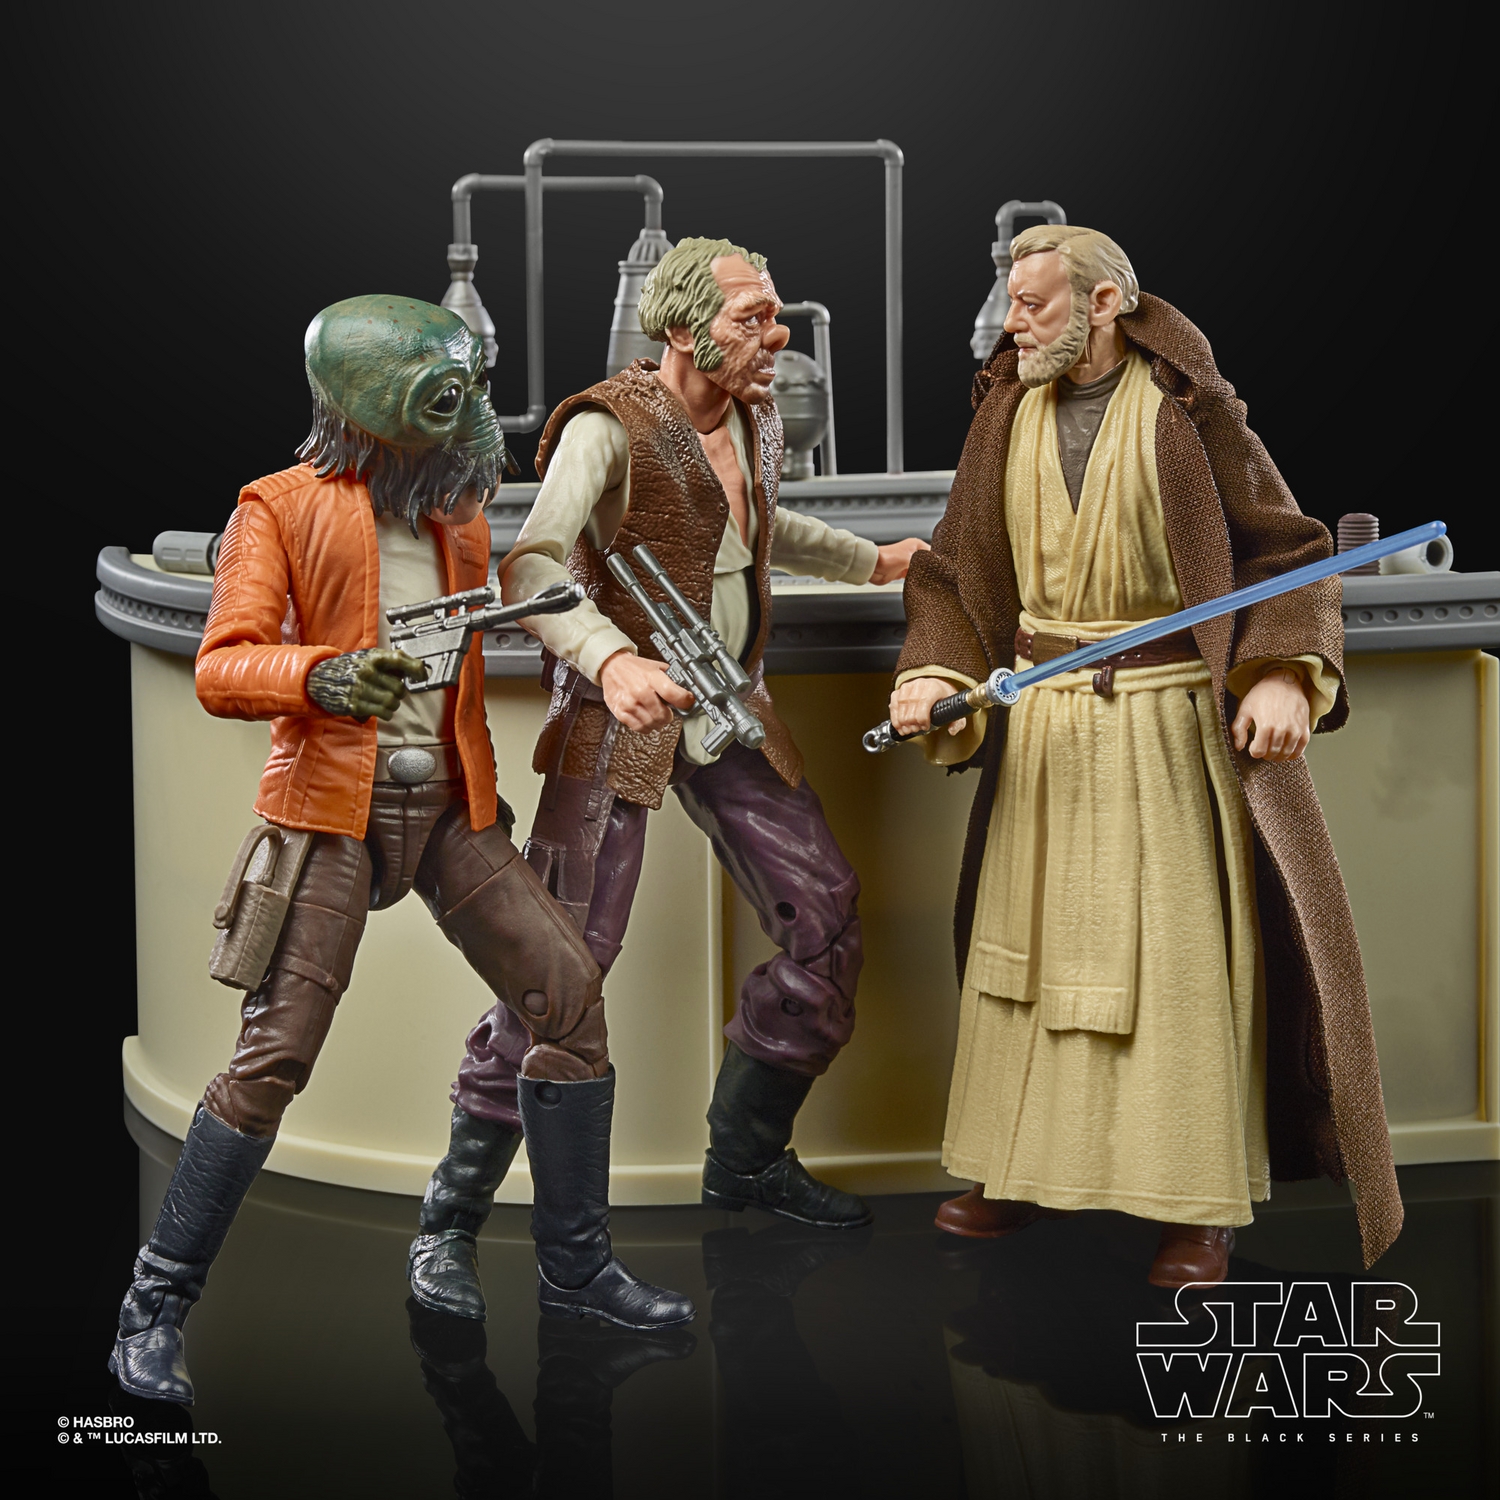 STAR WARS THE BLACK SERIES THE POWER OF THE FORCE CANTINA SHOWDOWN Playset - oop (19).jpg